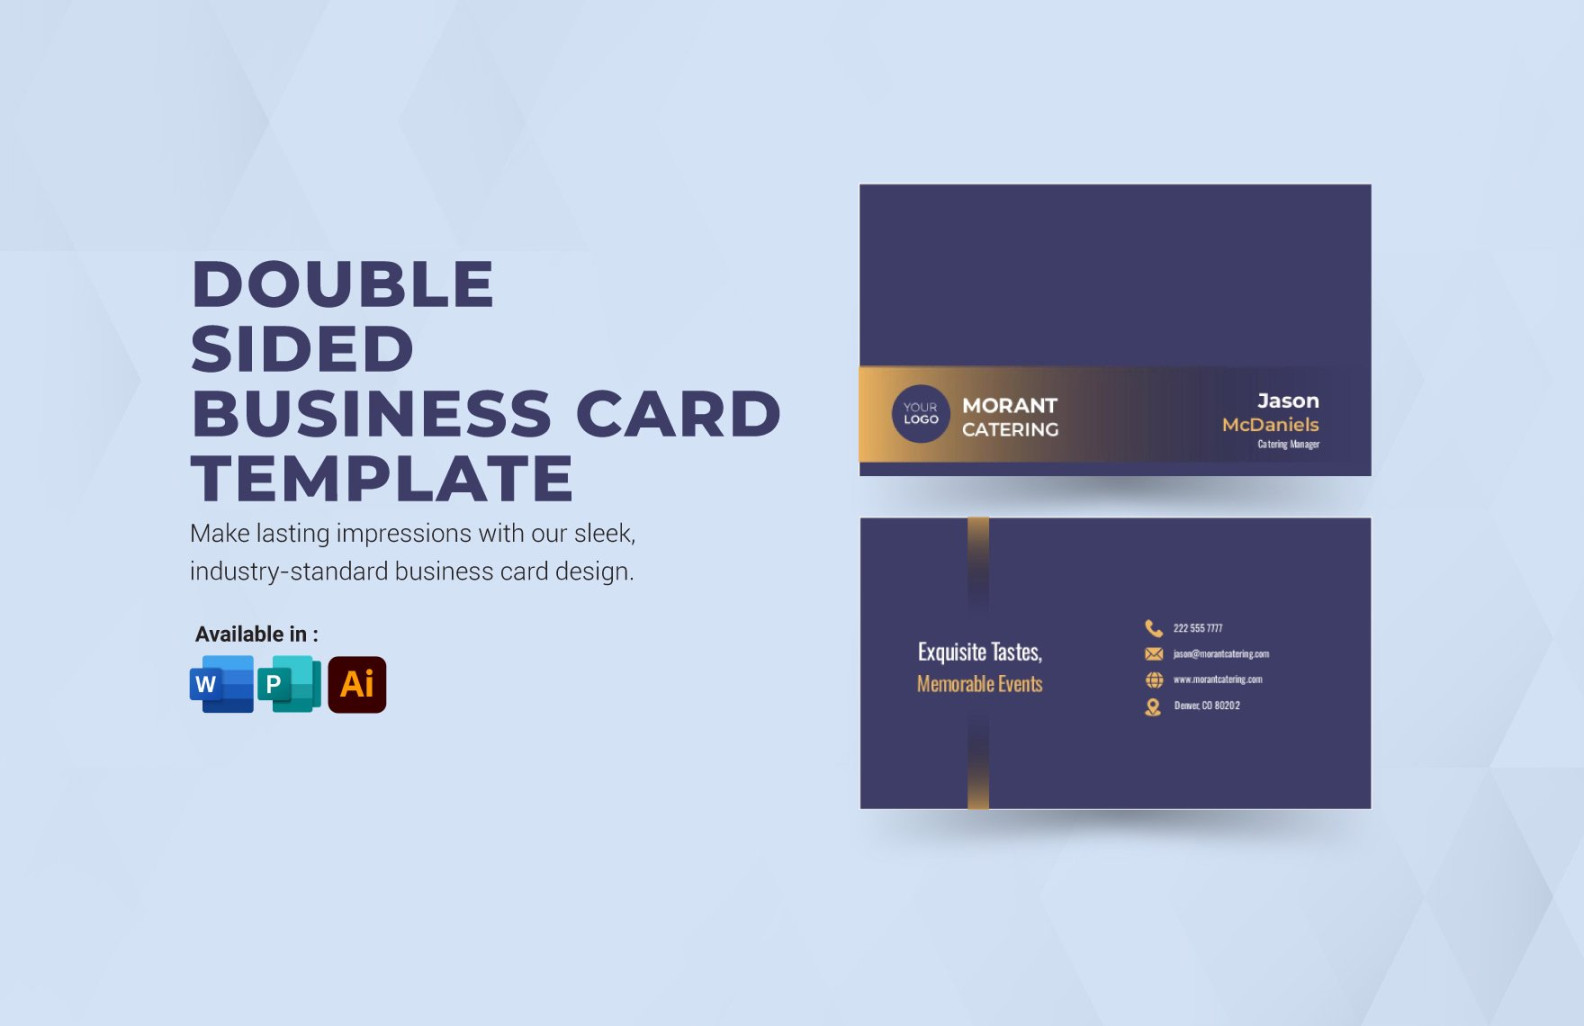 Double Sided Business Card Template in Word, Illustrator